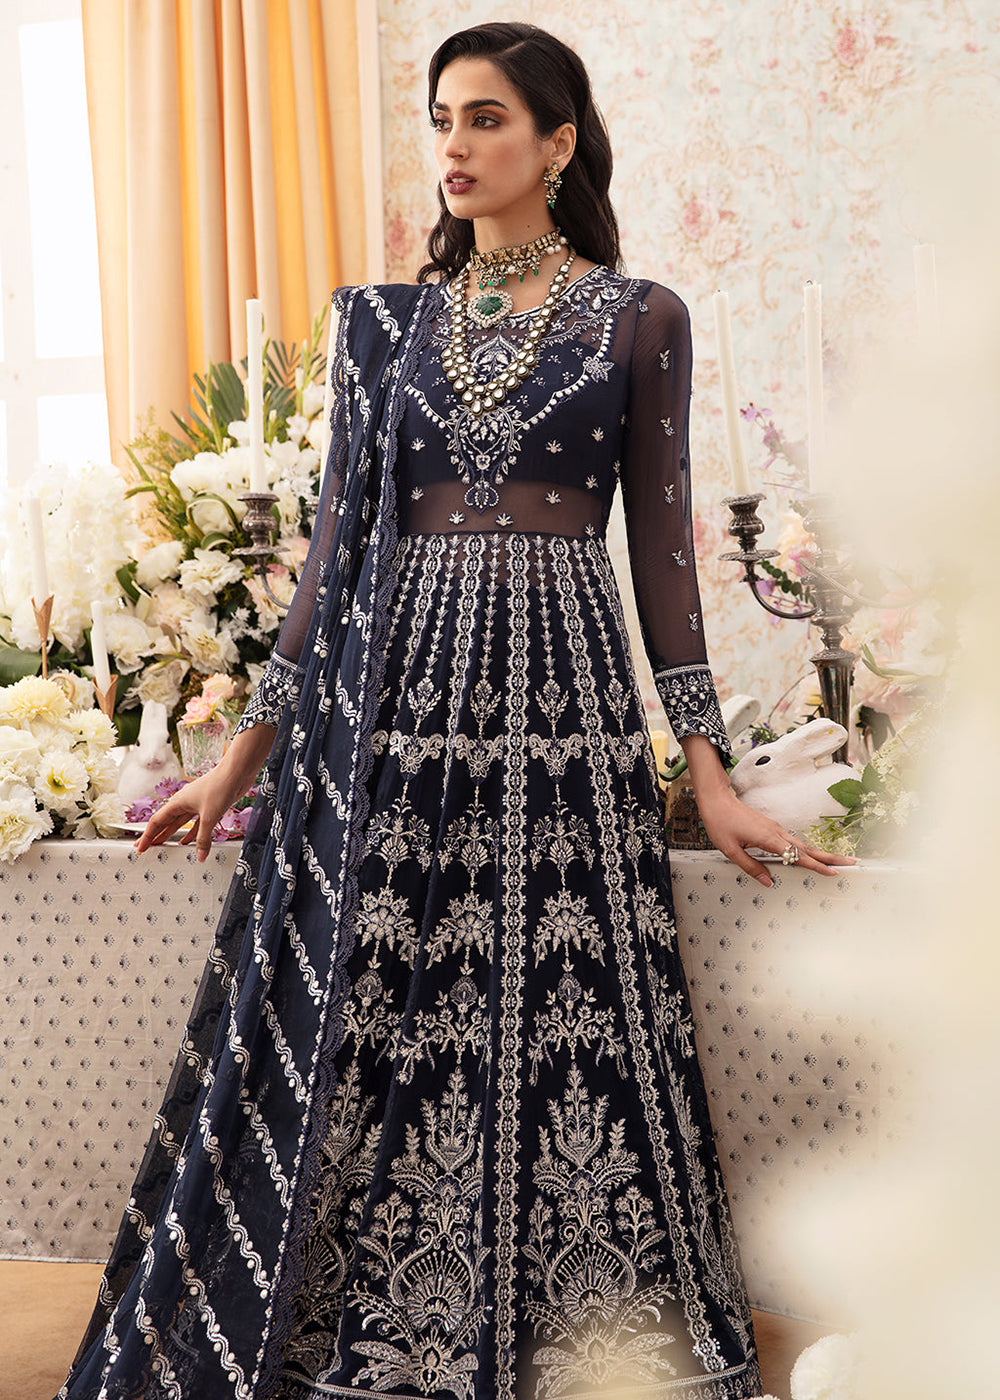 Buy Now The Whispers of Grandeur Luxury Formals '24 by Ayzel | HEMAYAL Online at Empress Online in USA, UK, Canada & Worldwide at Empress Clothing. 